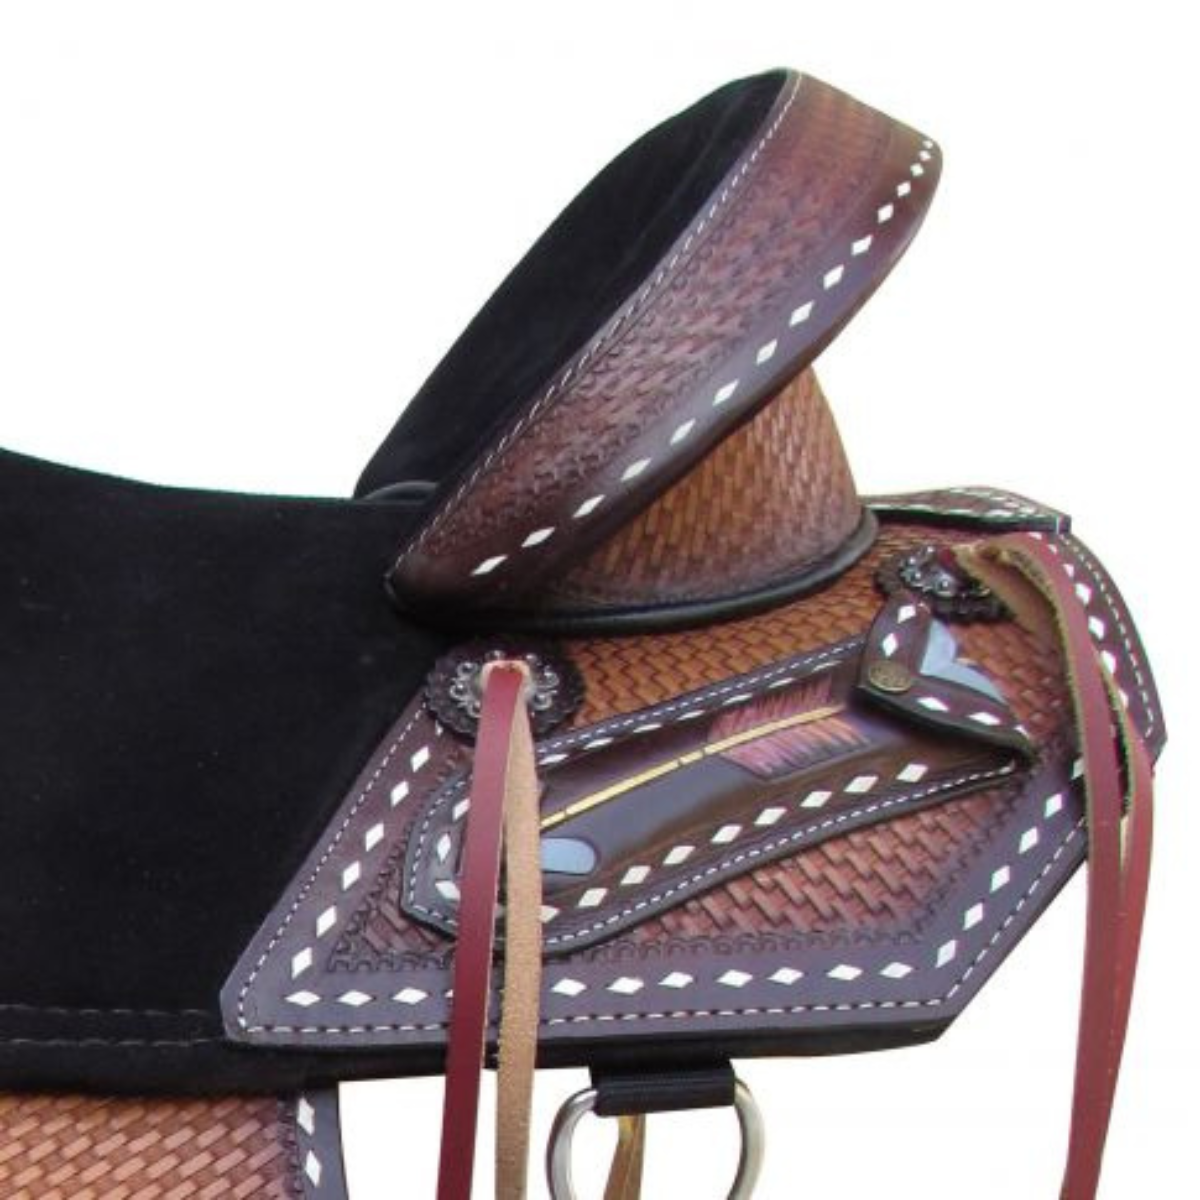 SADDLE WITH HAND PAINTED ARROW DESIGN - Double T Saddles